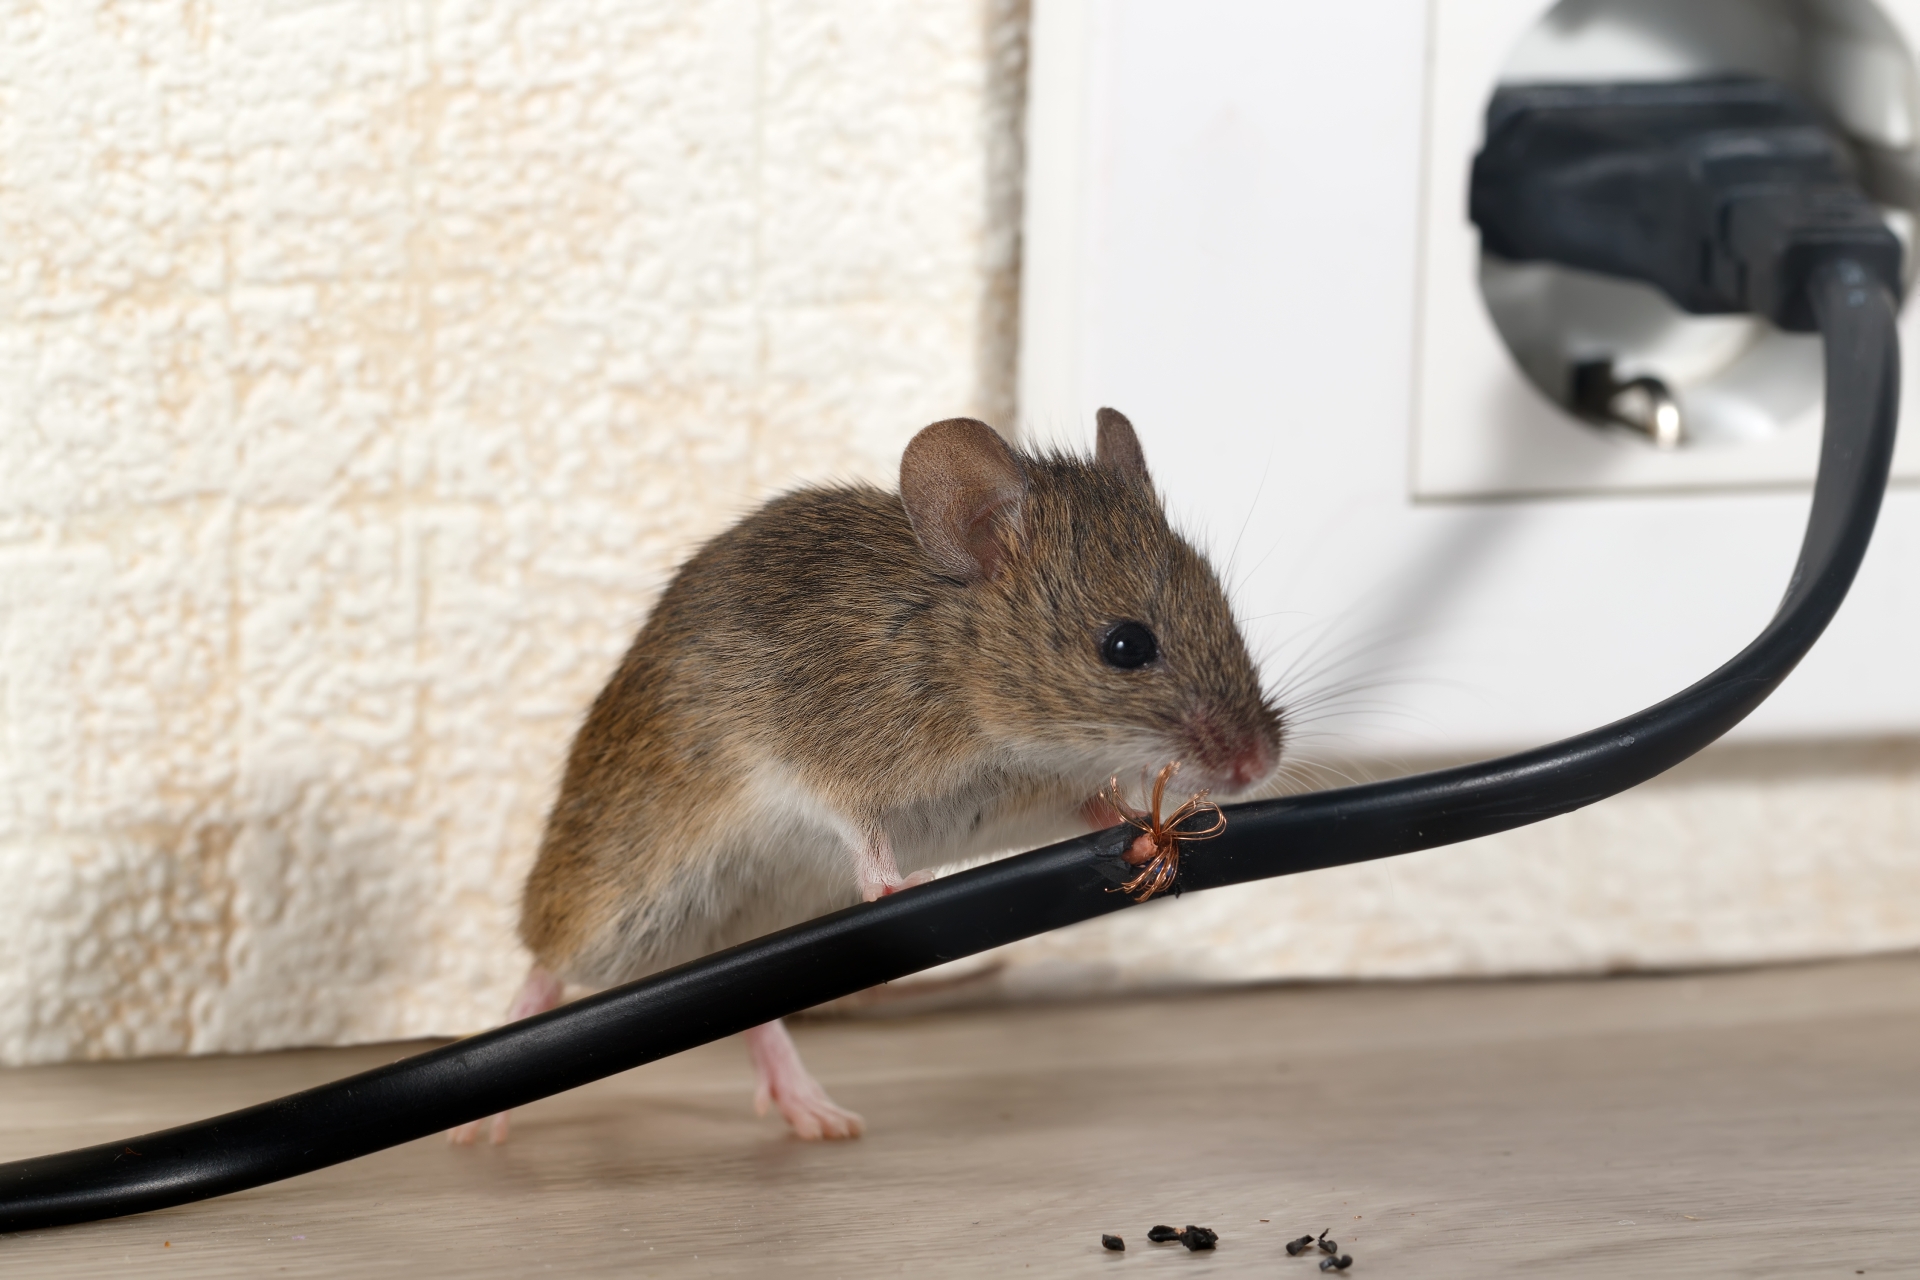 Mice Infestation, Pest Control in Herne Hill, SE24. Call Now 020 8166 9746